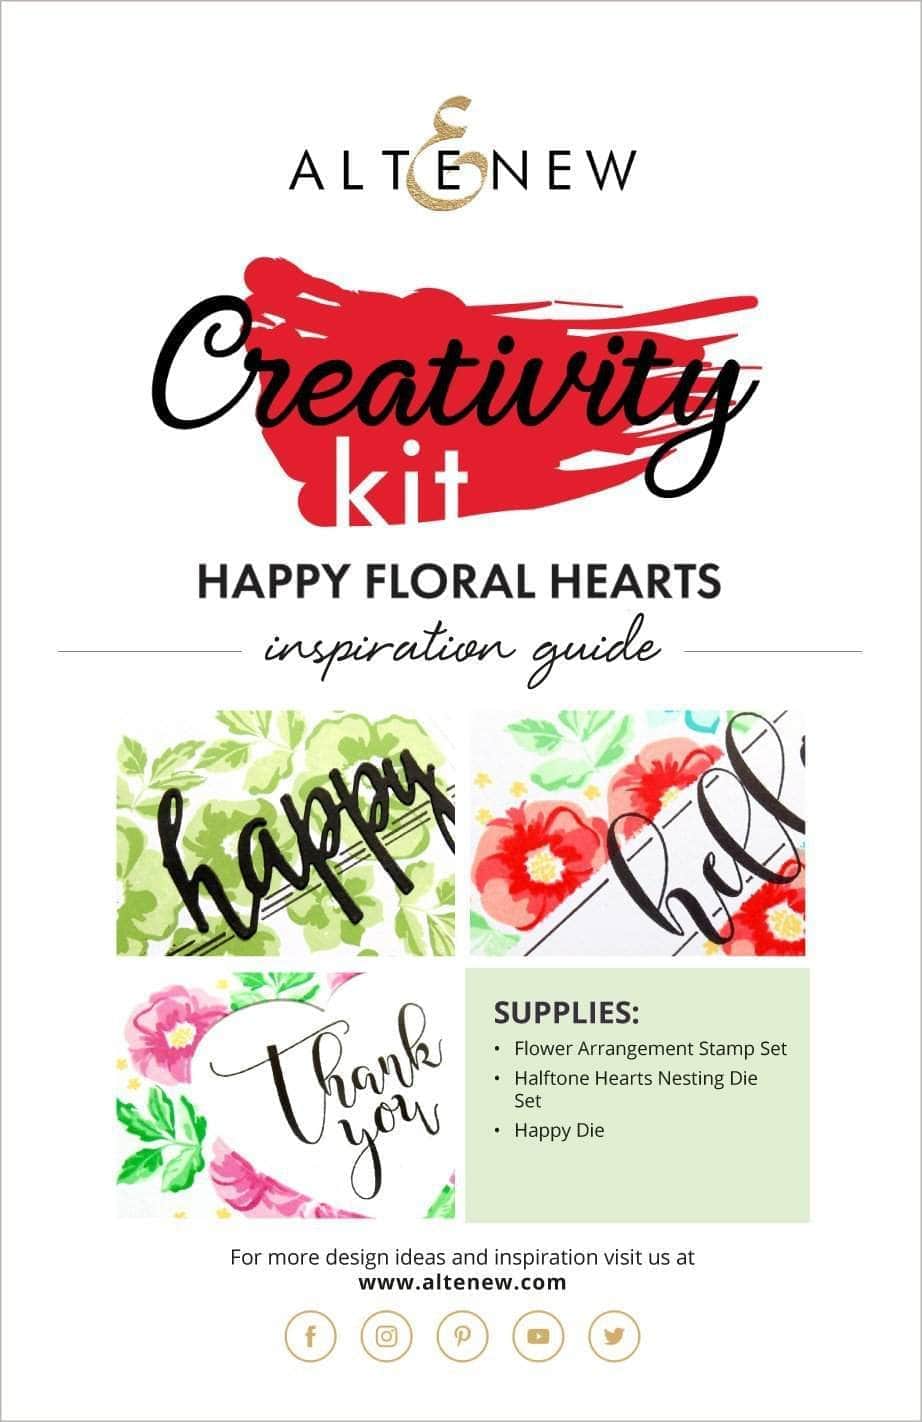 55Printing.com Printed Media Happy Floral Hearts Creativity Kit Inspiration Guide